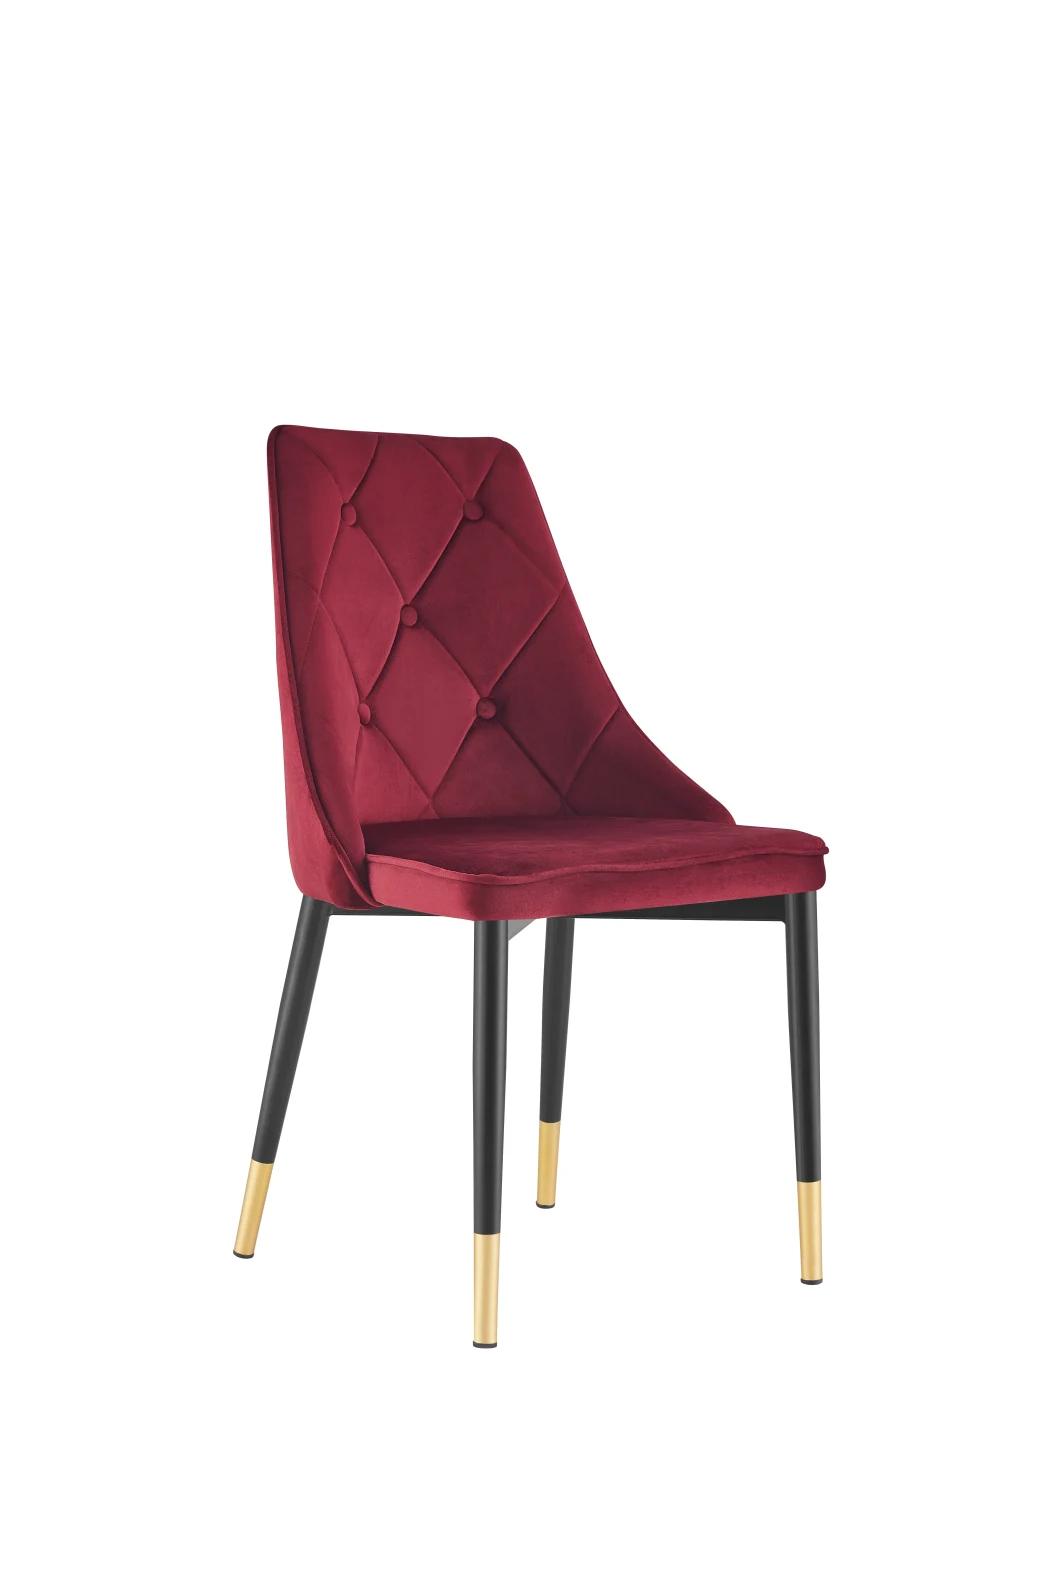 Hot-Selling Latest Style Metal Chair Velvet Wrapped Dining Chair for Dining Room Furniture